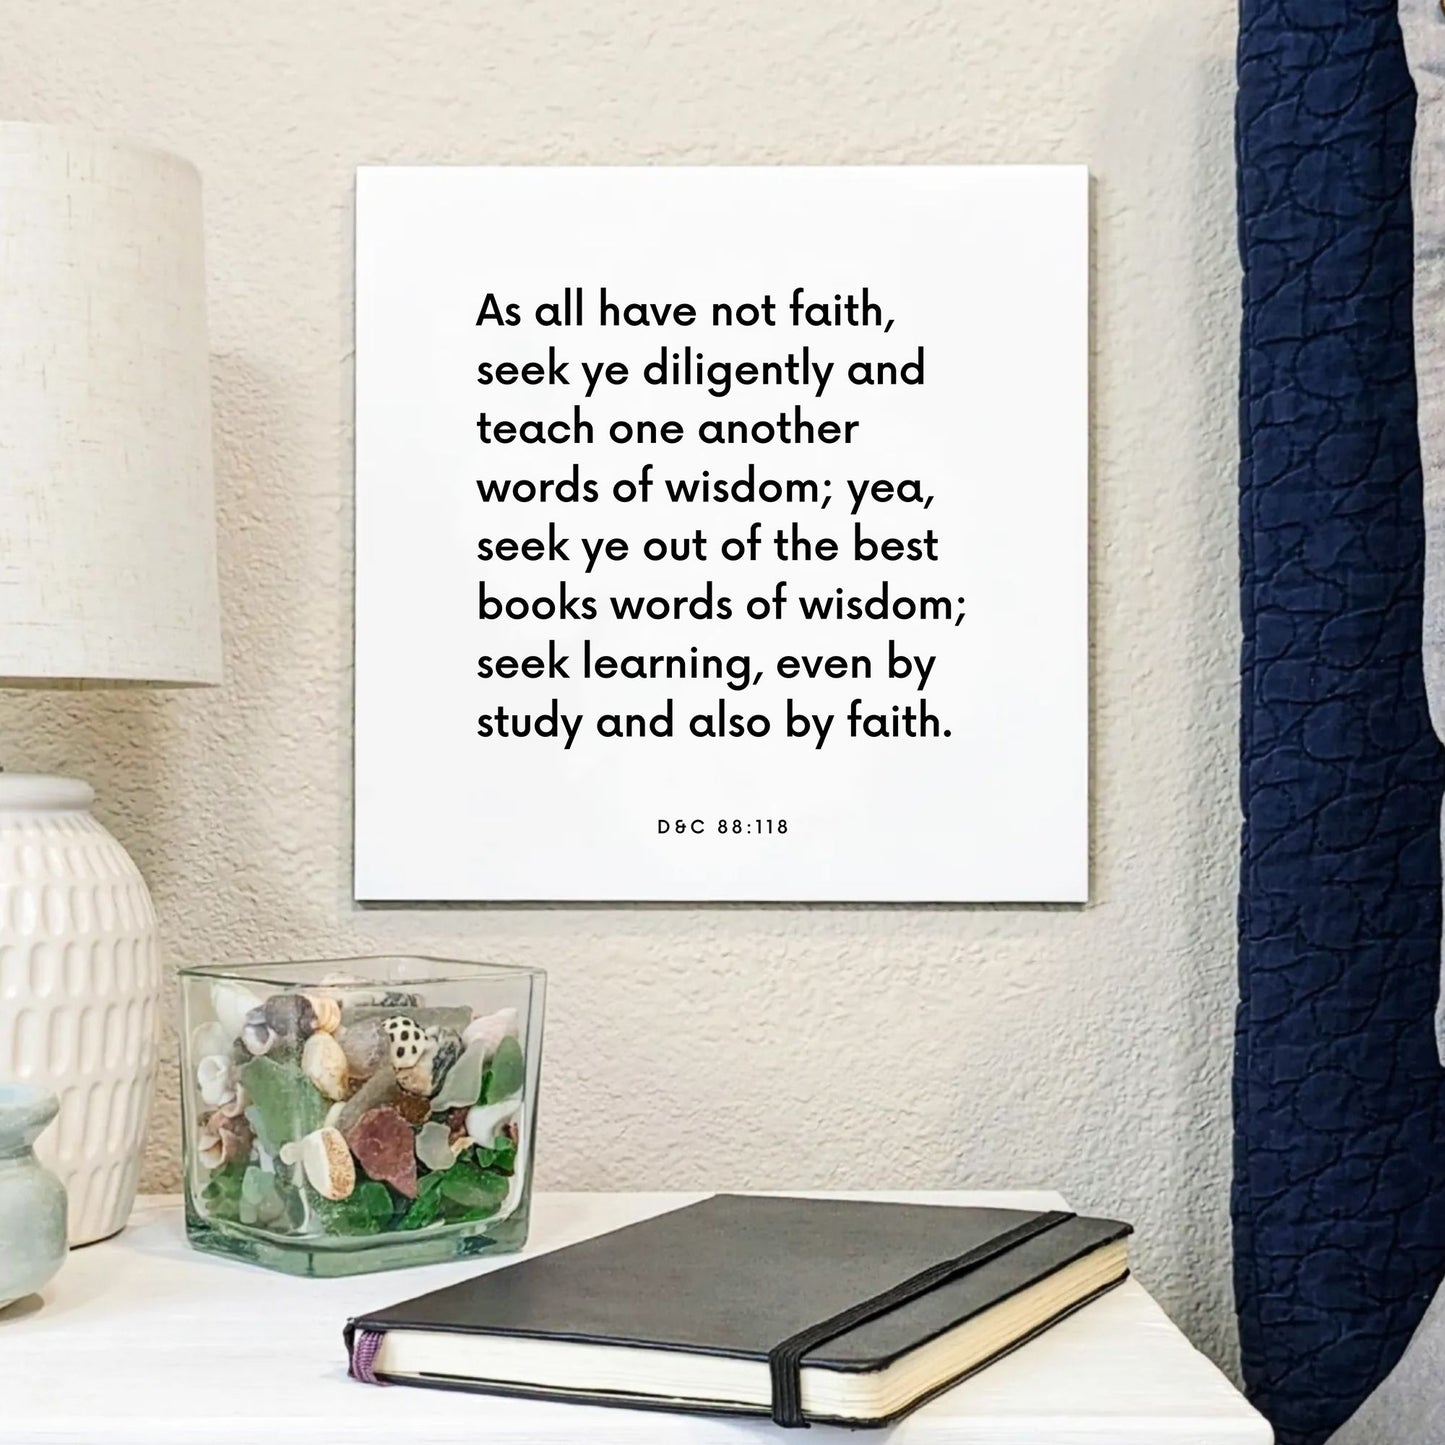 Bedside mouting of the scripture tile for D&C 88:118 - "Seek learning, even by study and also by faith"